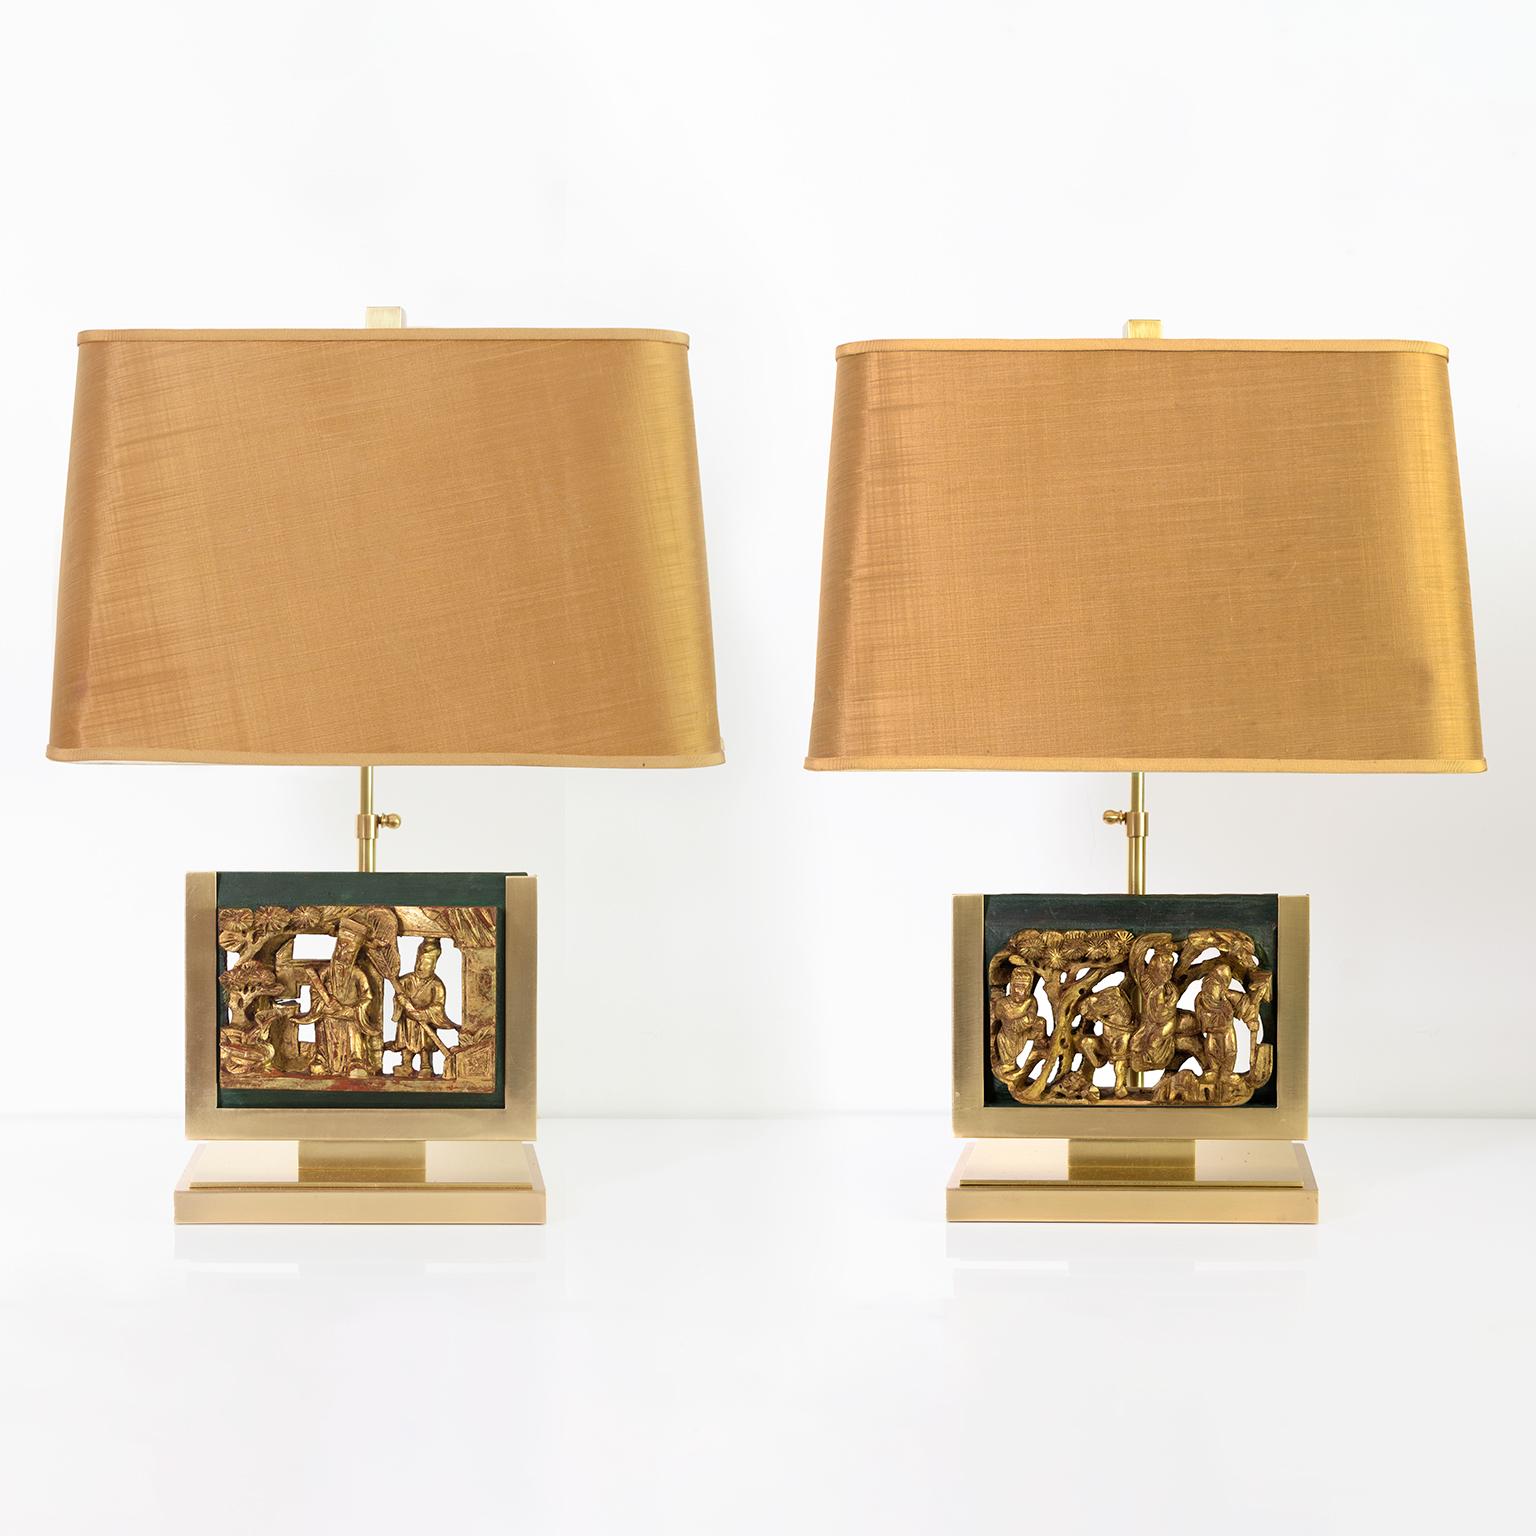 Pair of mid-century table lamps in polished solid brass with mounted Asian gilt-wood carvings. Each carving depicts a scene with figures in a landscape. The original fabric and paper shades show wear but have perfect proportions and sit on an